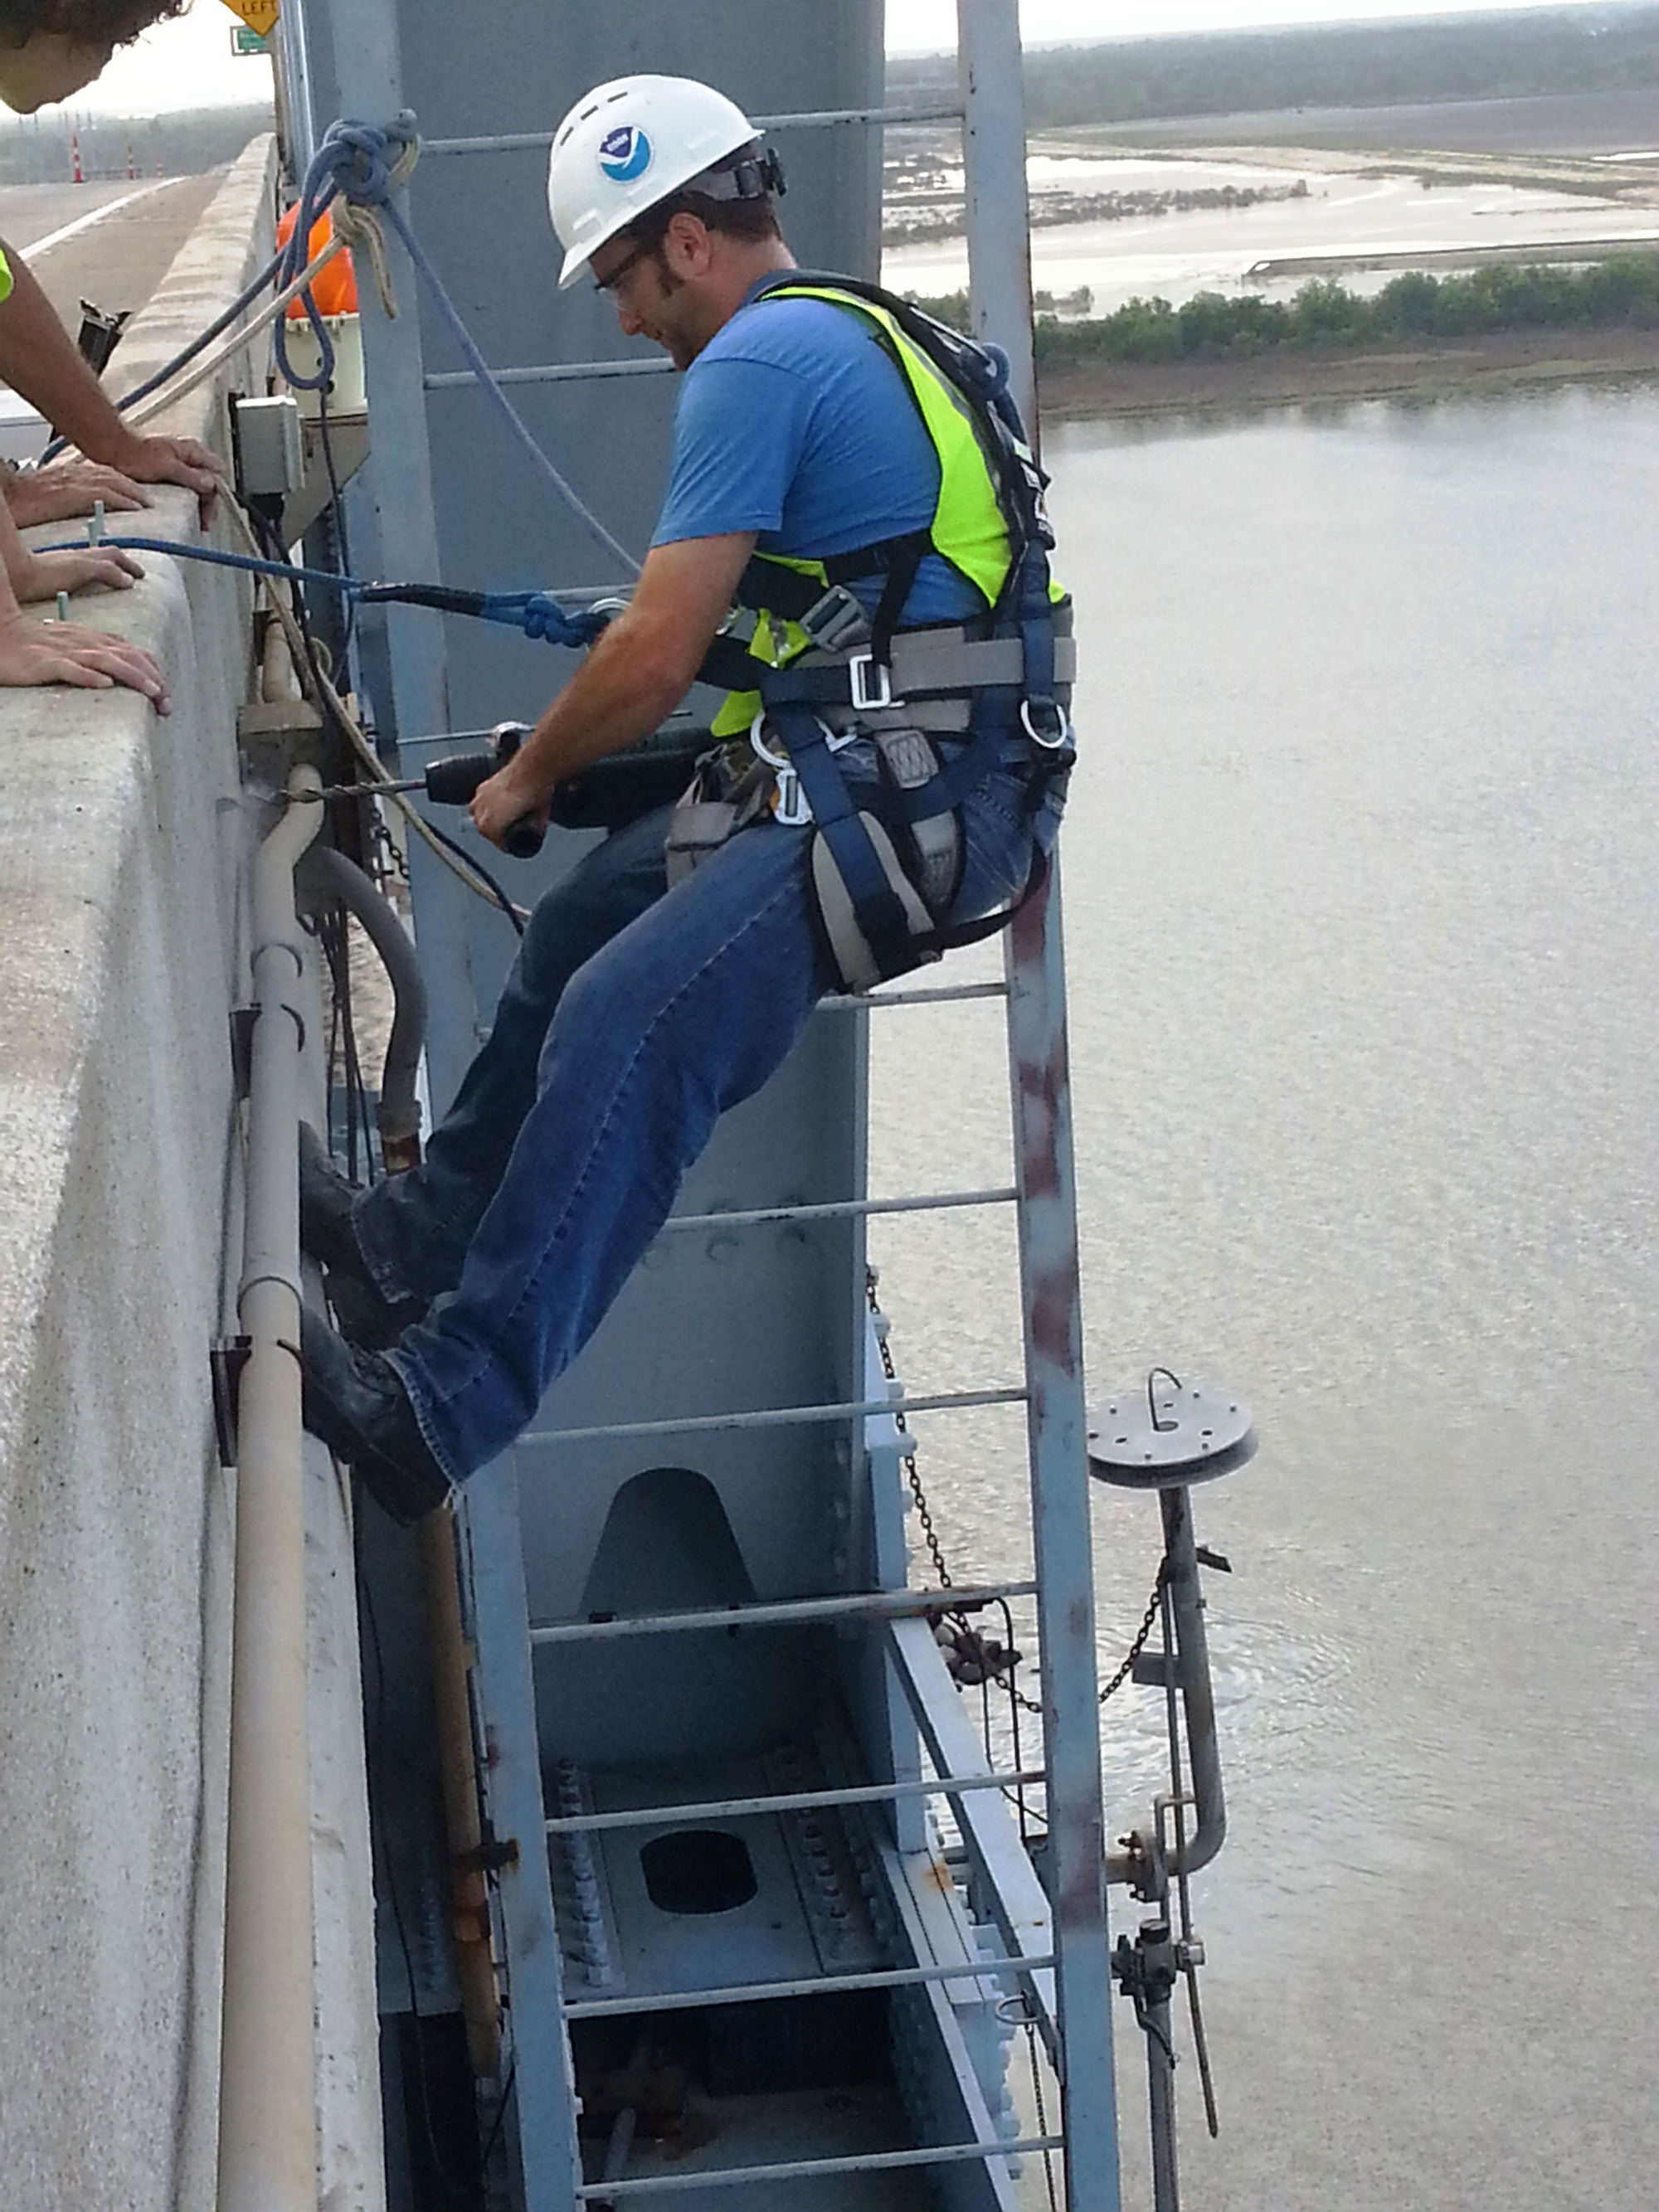  Center for Operational Oceanographic Products and Services staff installs an air gap sensor on the Don Holt Bridge in Charleston, South Carolina. The sensor is part of the Charleston Harbor Physical Oceanographic Real-Time System, or PORTS®. Information from the sensor is critical for under bridge clearance, as ships continue to maximize channel depths and widths while, at the same time, push the bounds of bridge heights.